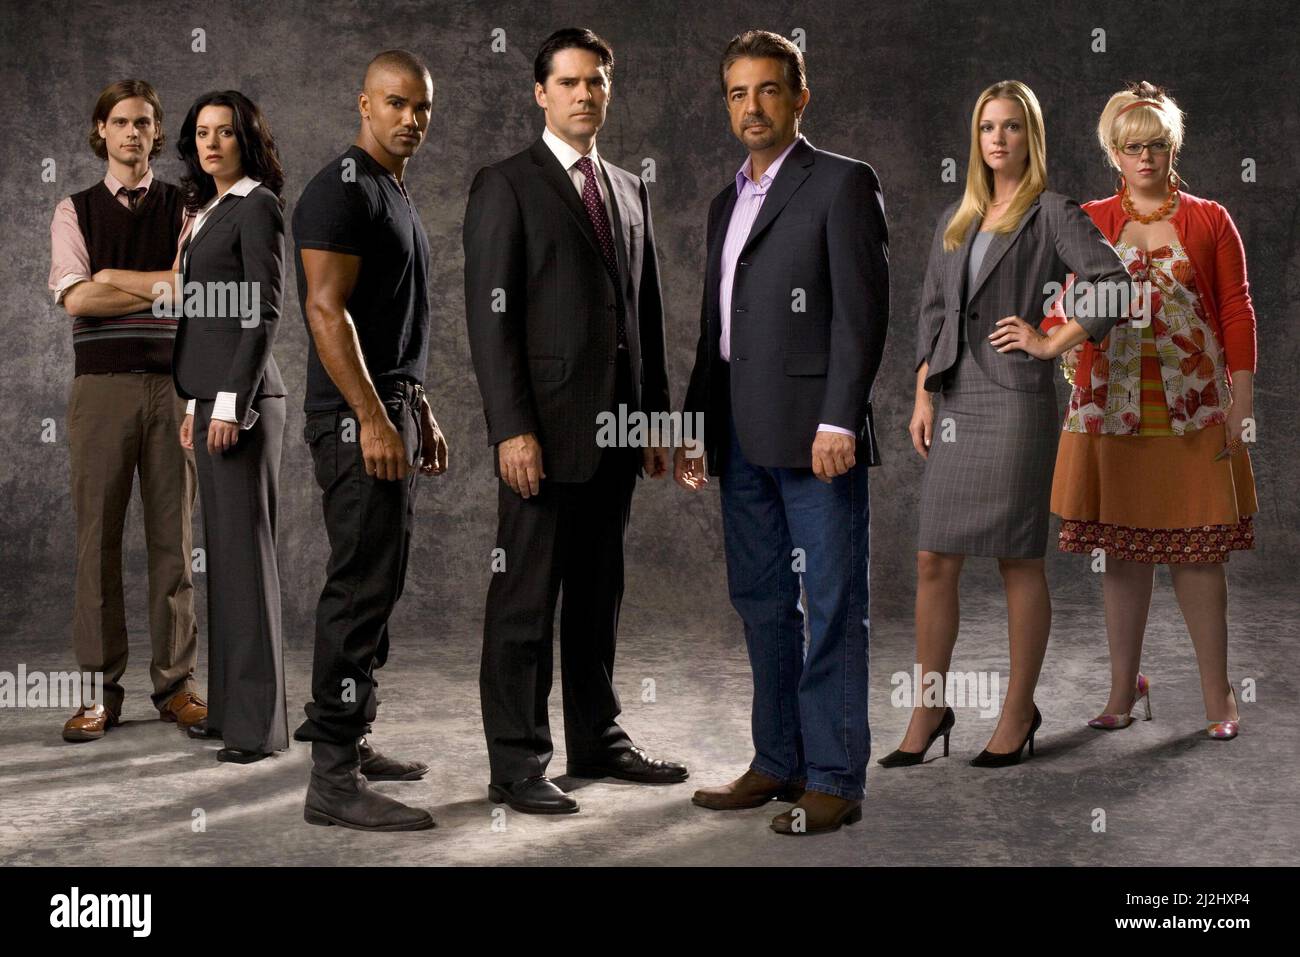 JOE MANTEGNA, THOMAS GIBSON, PAGET BREWSTER, SHEMAR MOORE, A. J. COOK, MATTHEW GRAY GUBLER and KIRSTEN VANGSNESS in CRIMINAL MINDS (2005), directed by CHARLES HAID and FELIX ENRIQUEZ ALCALA. Credit: CBS TELEVISION / Album Stock Photo